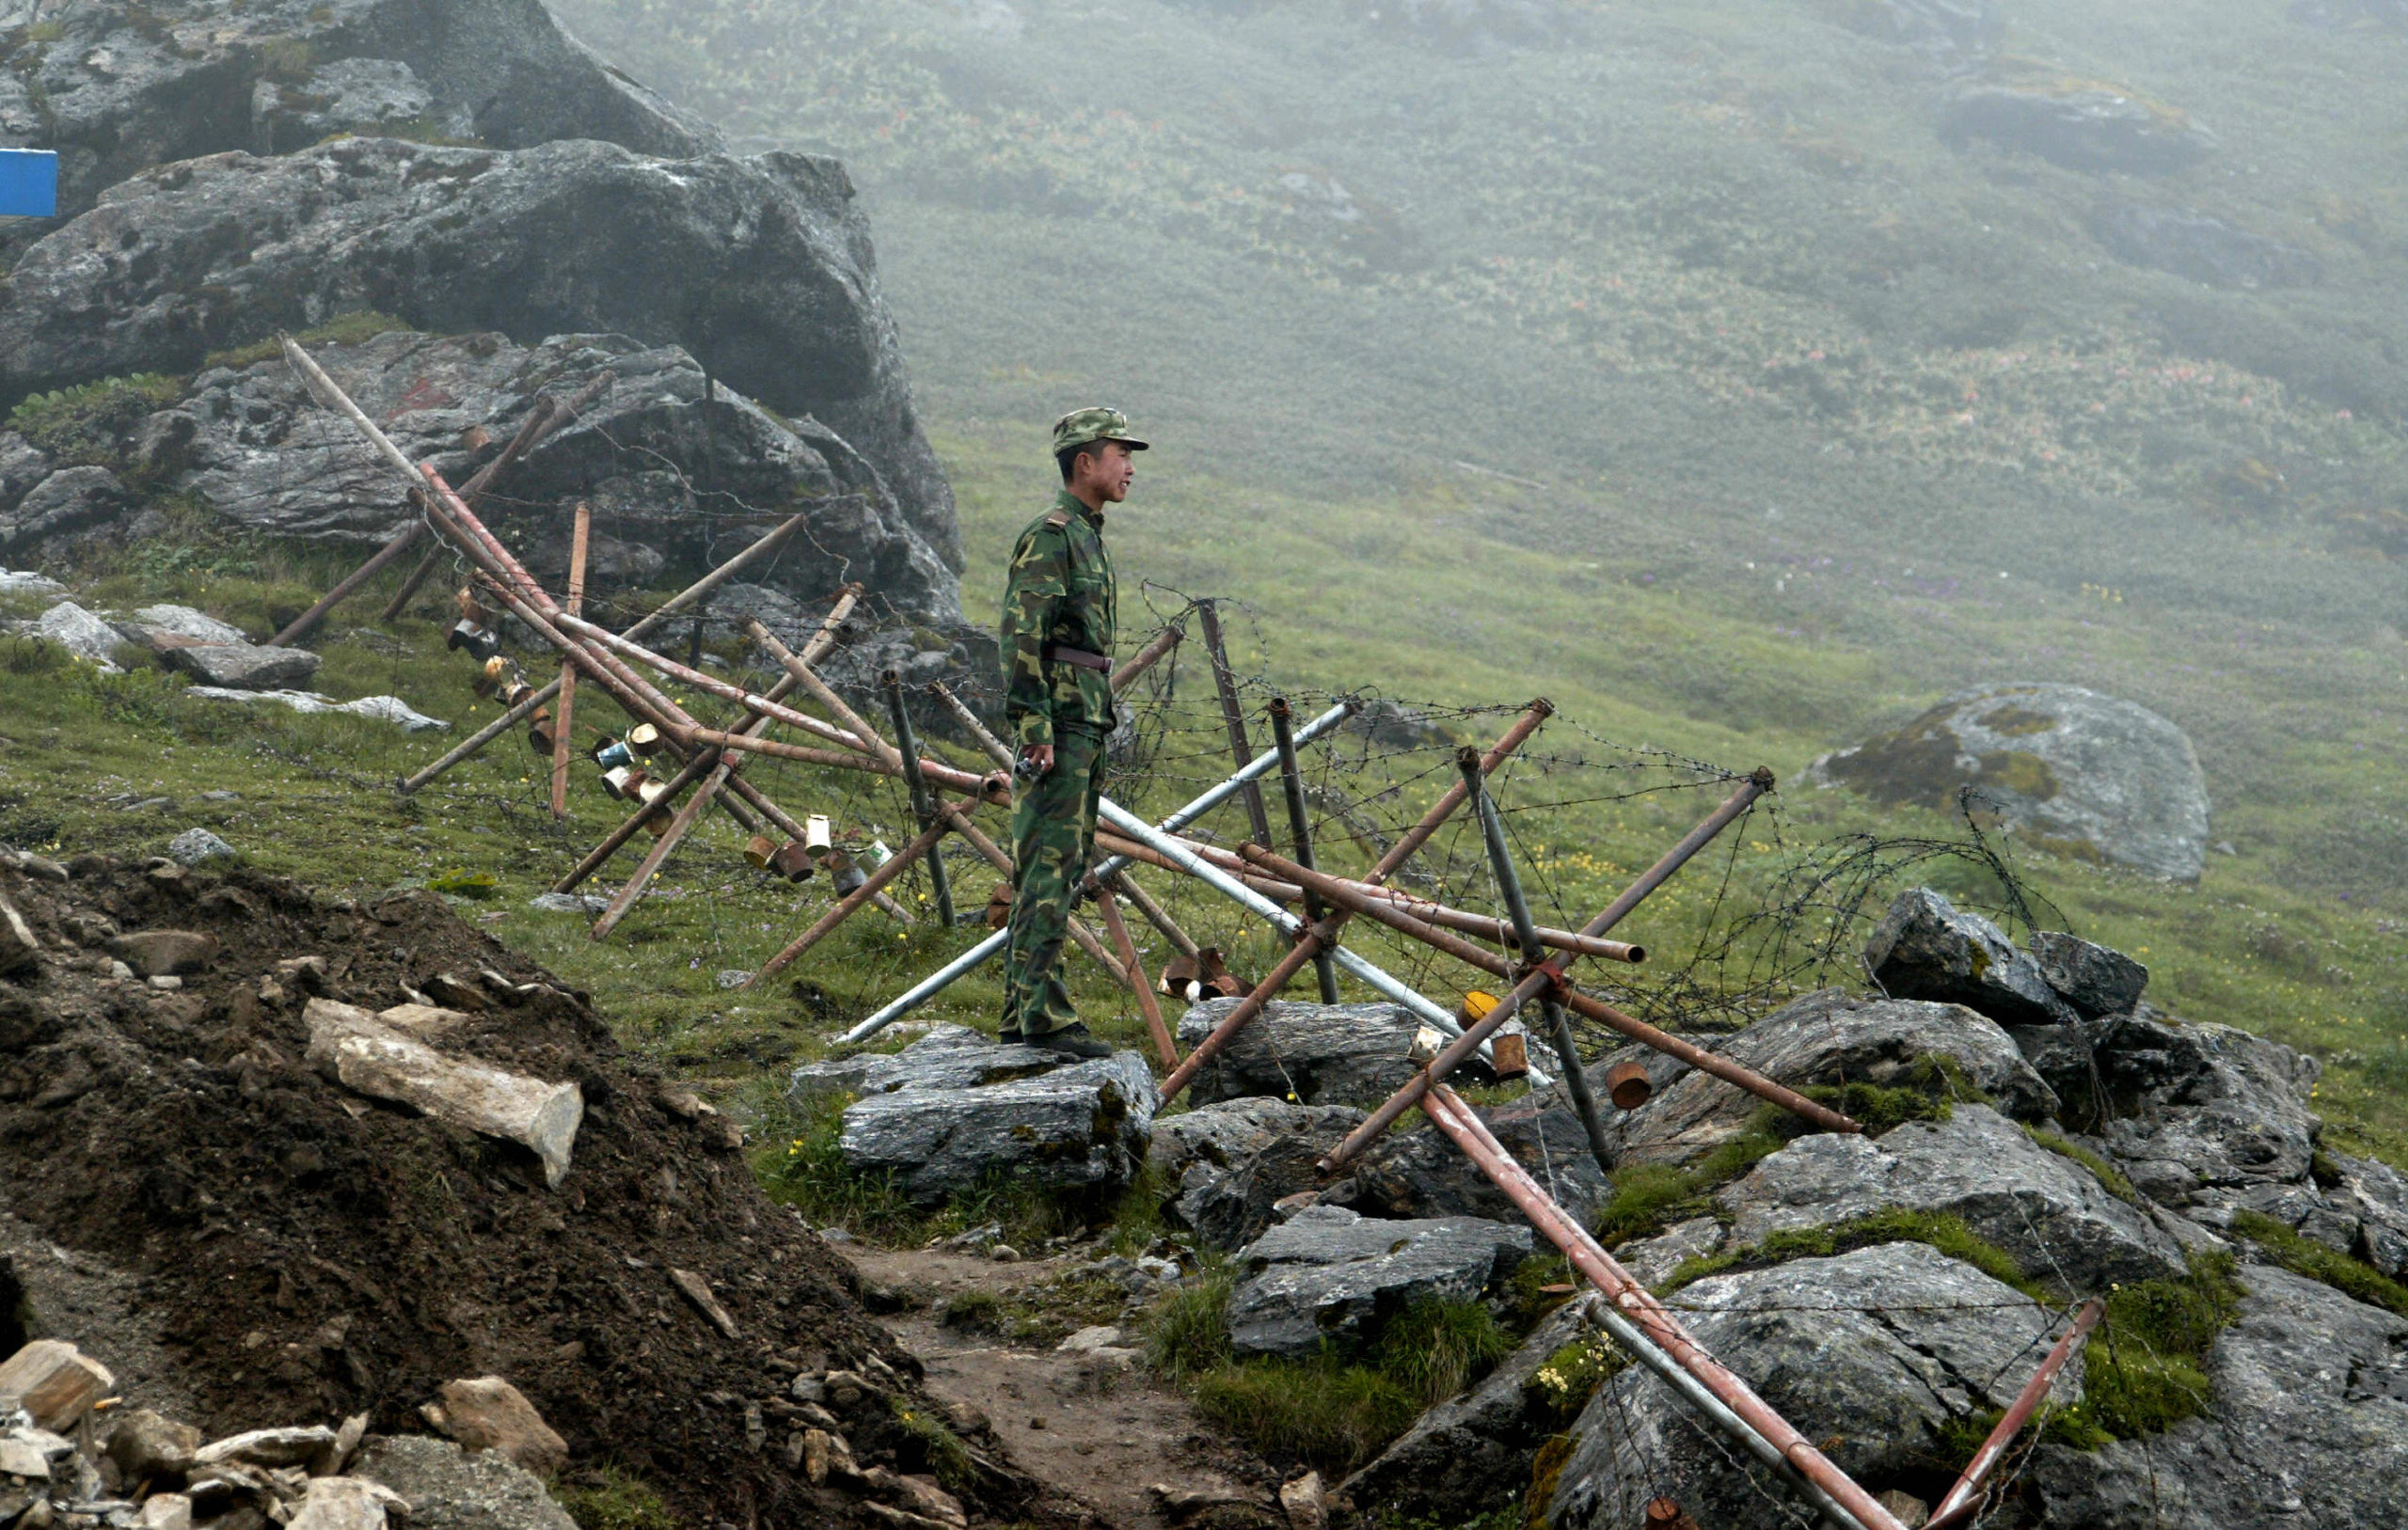 In this photograph taken on July 10, 2008, a Chinese soldier stands guard on the Chinese side of the ancient Nathu La border crossing between India and China. When the two Asian giants opened the 4,500-metre-high (15,000 feet) pass in 2006 to improve ties dogged by a bitter war in 1962 that saw the route closed for 44 years, many on both sides hoped it would boost trade. Two years on, optimism has given way to despair as the flow of traders has shrunk to a trickle because of red tape, poor facilities and sub-standard roads in India's remote northeastern mountainous state of Sikkim. AFP PHOTO/Diptendu DUTTA (Photo credit should read DIPTENDU DUTTA/AFP via Getty Images)